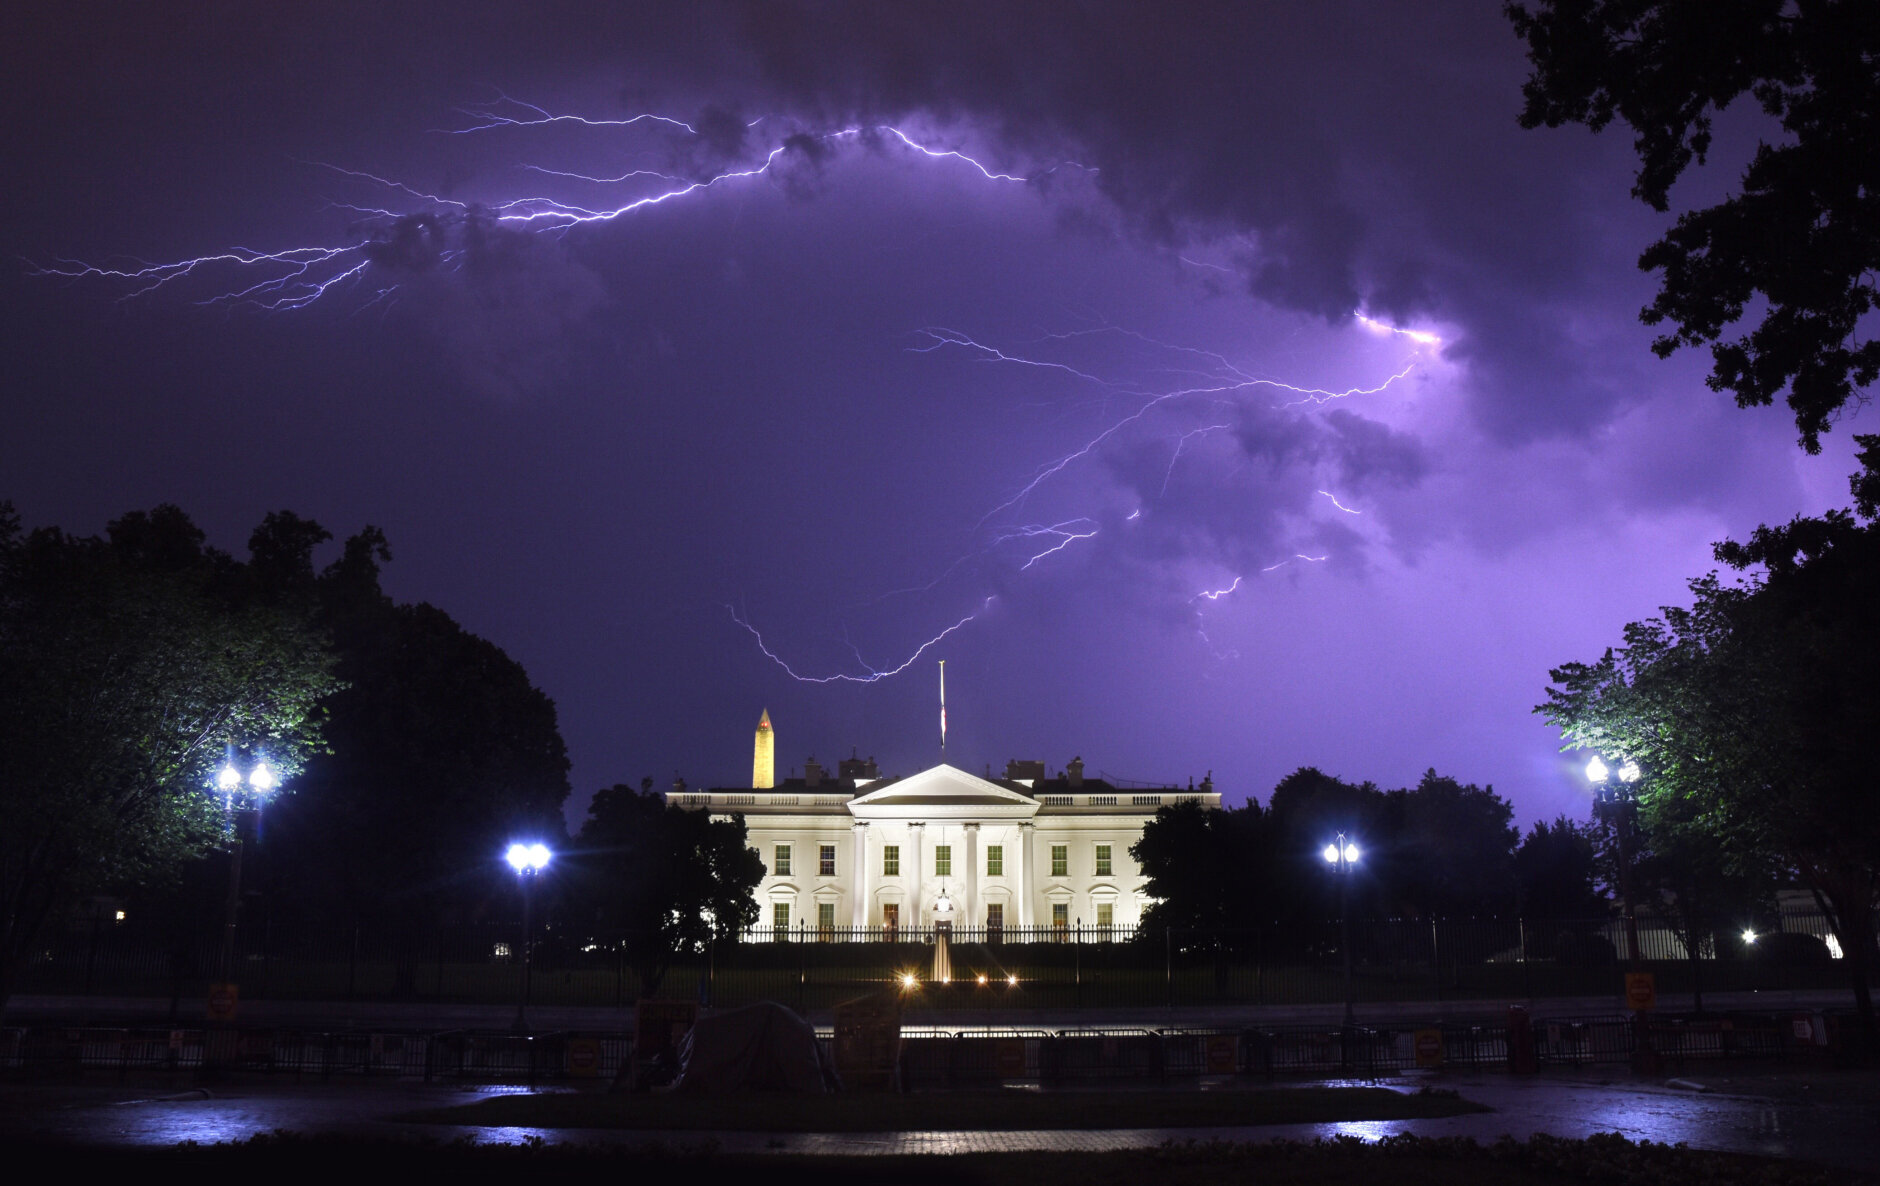 <h3>Deadly lightning strike</h3>
<p>Three people were tragically struck by lightning and killed near the White House on Aug. 4. A fourth person was struck and injured but survived.</p>
<p>Powerful, drenching storms developed over the close-in Virginia suburbs during the evening and moved into D.C. around 7 p.m.</p>
<p>The Metropolitan Police Department confirmed James Mueller, 76, and Donna Mueller, 75, a retired couple from Janesville, Wisconsin, along with 29-year-old Brooks A. Lambertson of Los Angeles, California, <a href="https://wtop.com/dc/2022/08/4-people-in-critical-condition-after-lightning-strike-near-white-house/">died</a>. They were struck by lightning while standing near a tree in Lafayette Park, a D.C. Fire and EMS spokesman said.</p>
<p>A fourth person, Amber Escudero-Kontostathis, was struck but survived. Escudero-Kontostathis later <a href="https://www.nbcwashington.com/news/local/not-gonna-waste-my-second-chance-woman-who-survived-dc-lightning-strike-shares-story/3135788/">told NBC Washington</a> that she was not sure why she pulled through, but she definitely is &#8220;not going to waste my second chance at life.&#8221;</p>
<p>The National Weather Service says being underneath a tree is the second leading cause of <a href="https://www.weather.gov/iln/lightningsafetyweek">lightning casualties</a>. If thunder is heard or lightning is seen, the safest place to be is inside a large enclosed structure with plumbing and electrical wiring. If no buildings are available, a metal vehicle such as a car, van or bus is a suitable alternative.</p>
